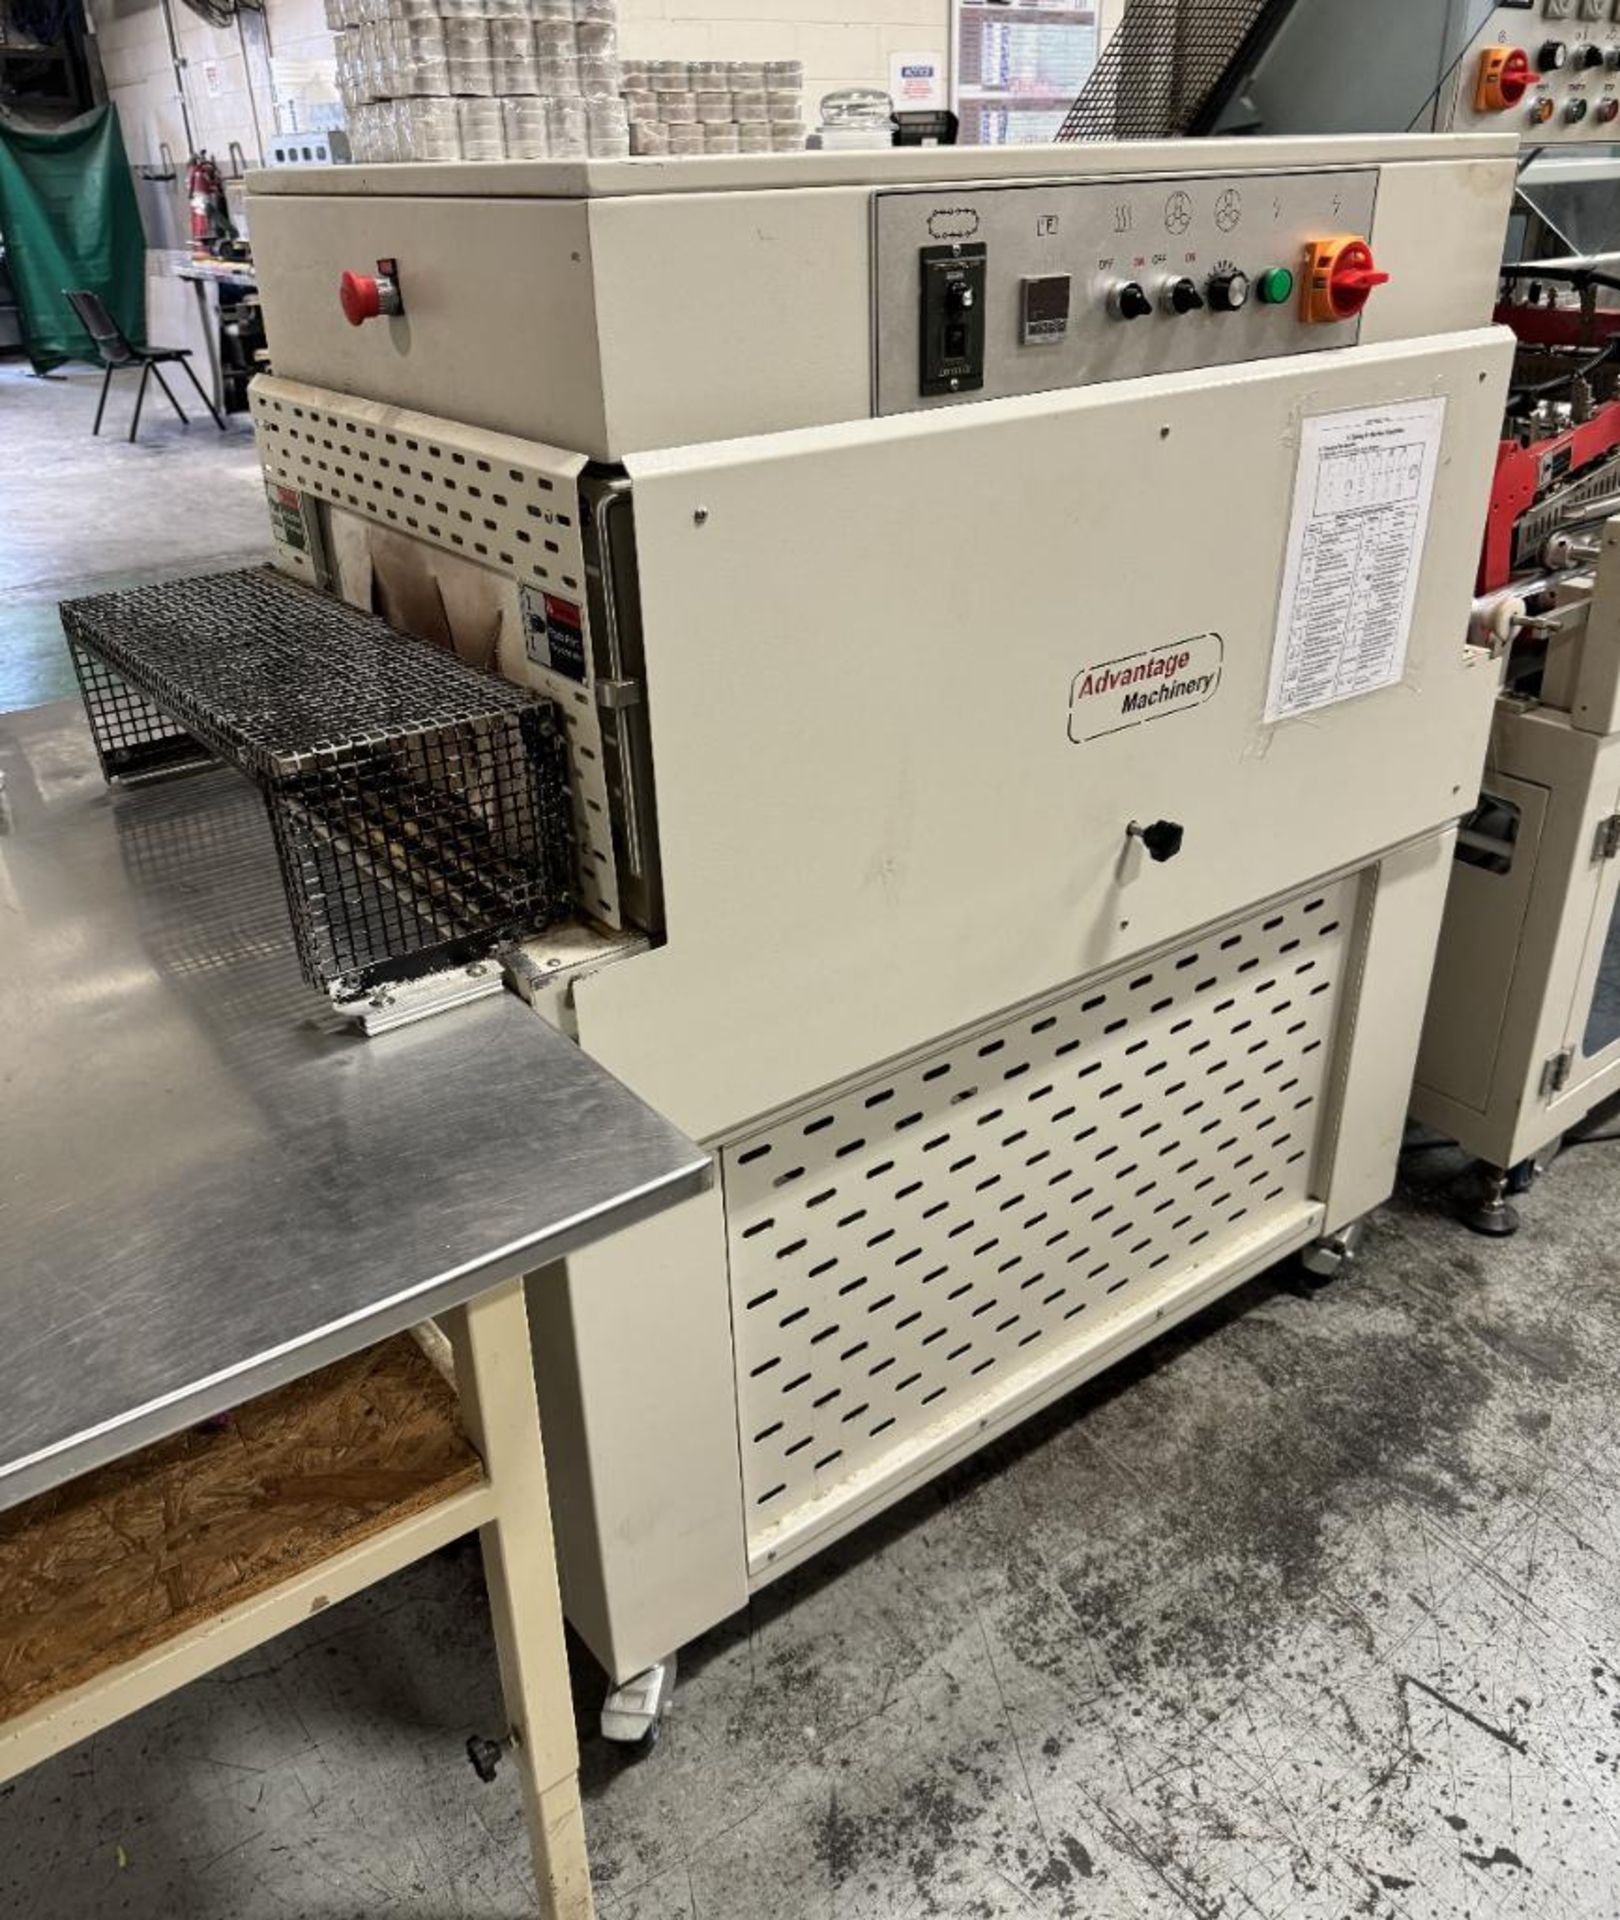 Advantage Machinery L-728 L-Bar Sealing Machine, Serial# 19-001156B, Built 2019. With belted conveyo - Image 17 of 18